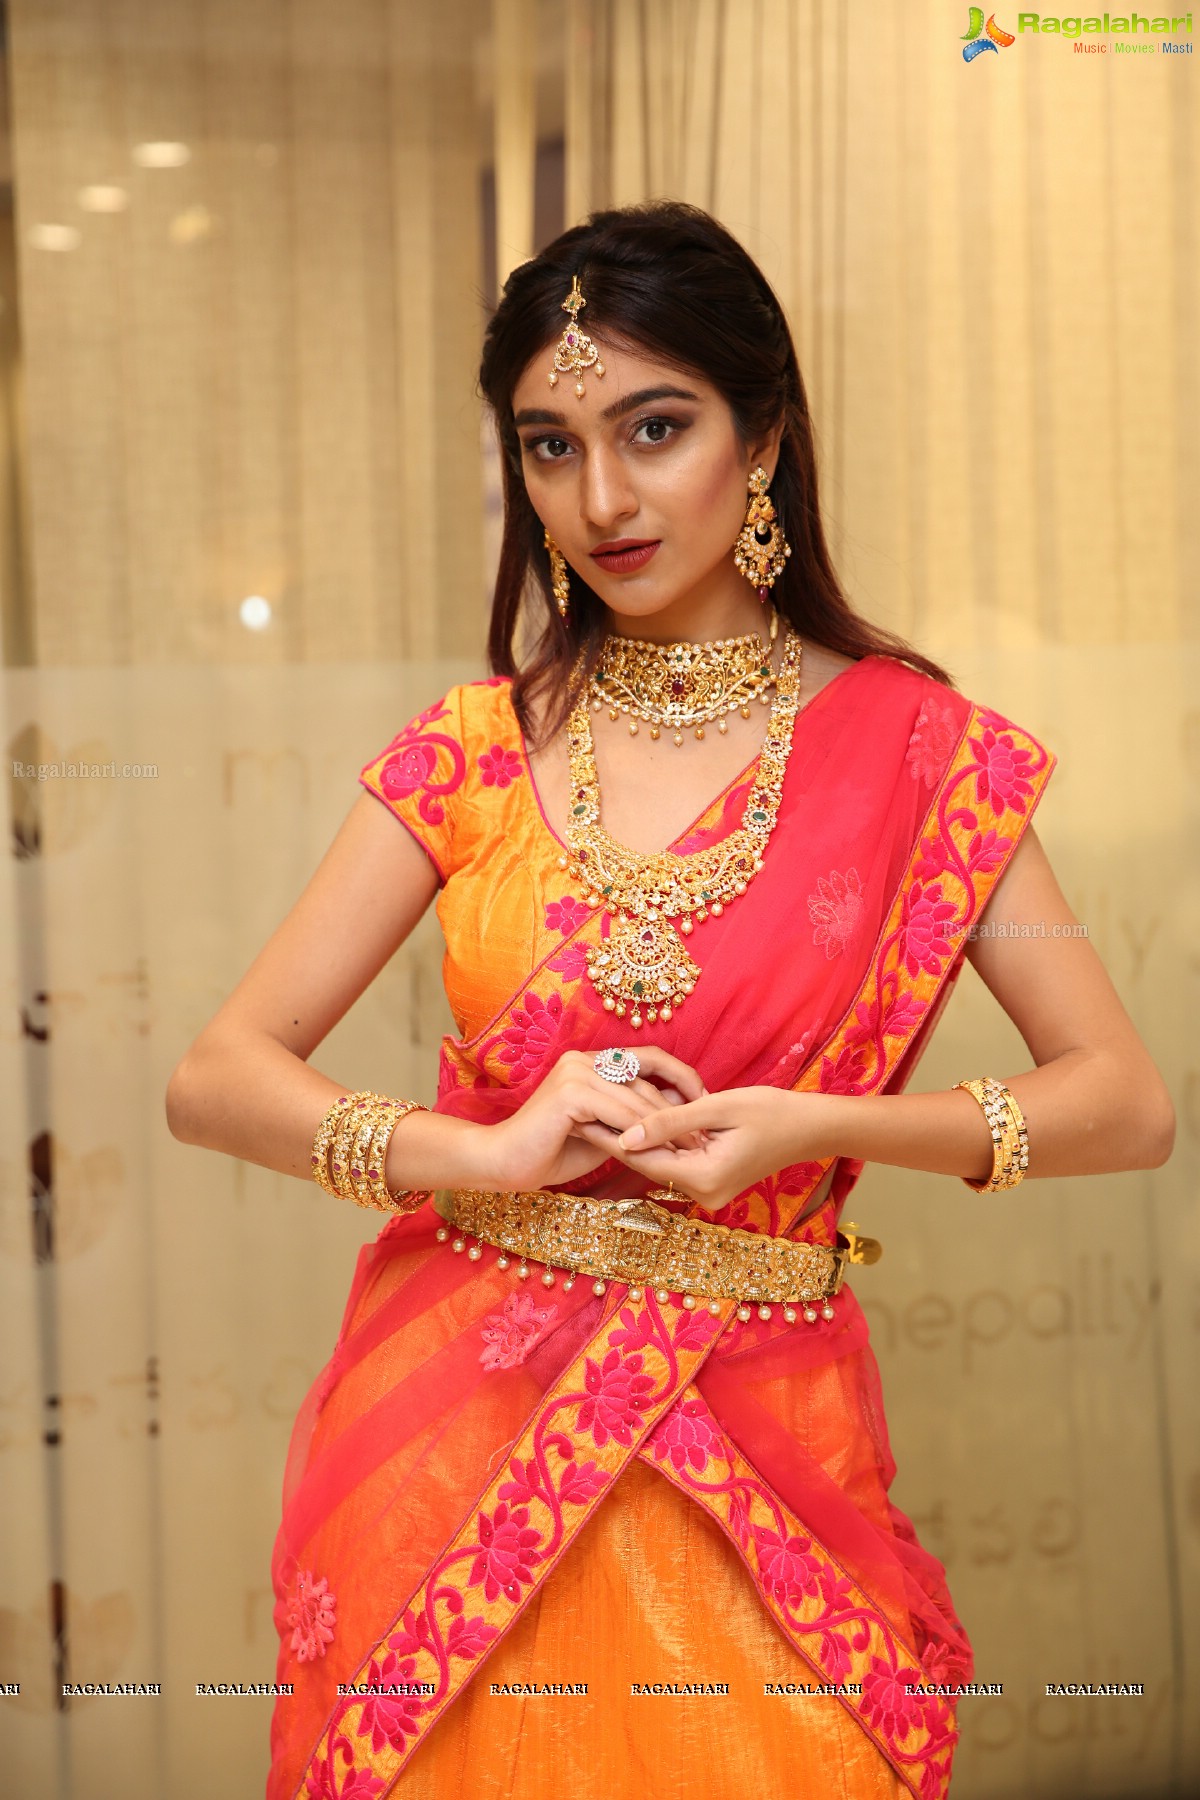 Manepally Jewellers Unveils Special Diwali Collection